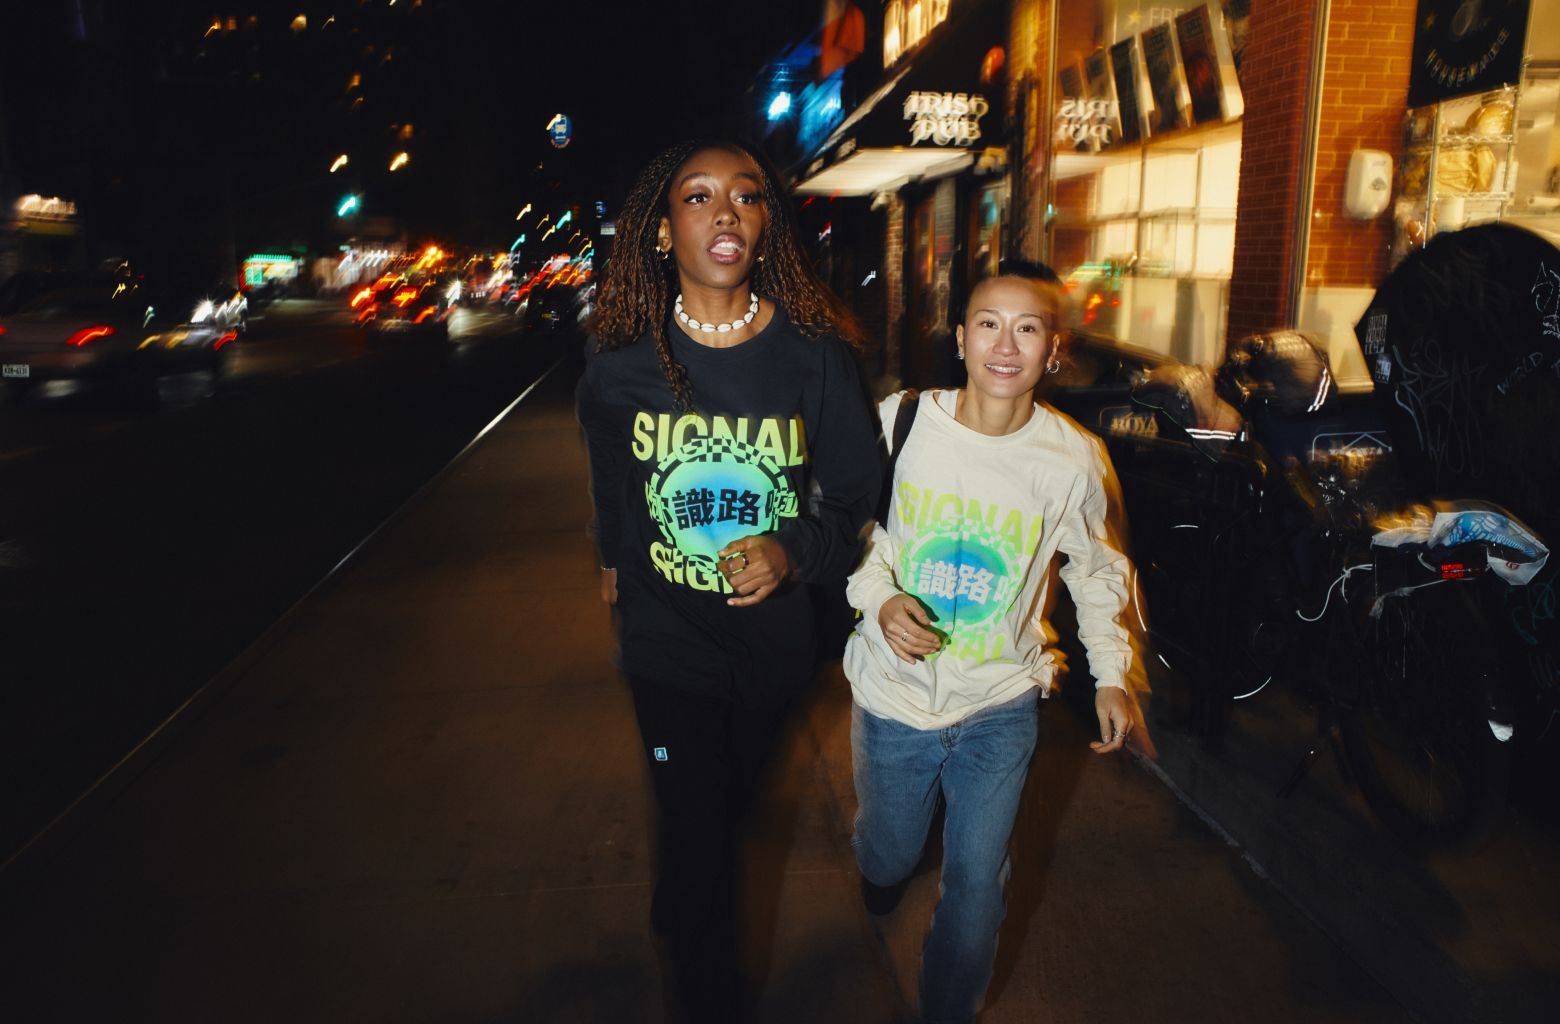 Two friends laughing on the street at night wearing Signal longsleeve shirts and holding a Signal tote bag.